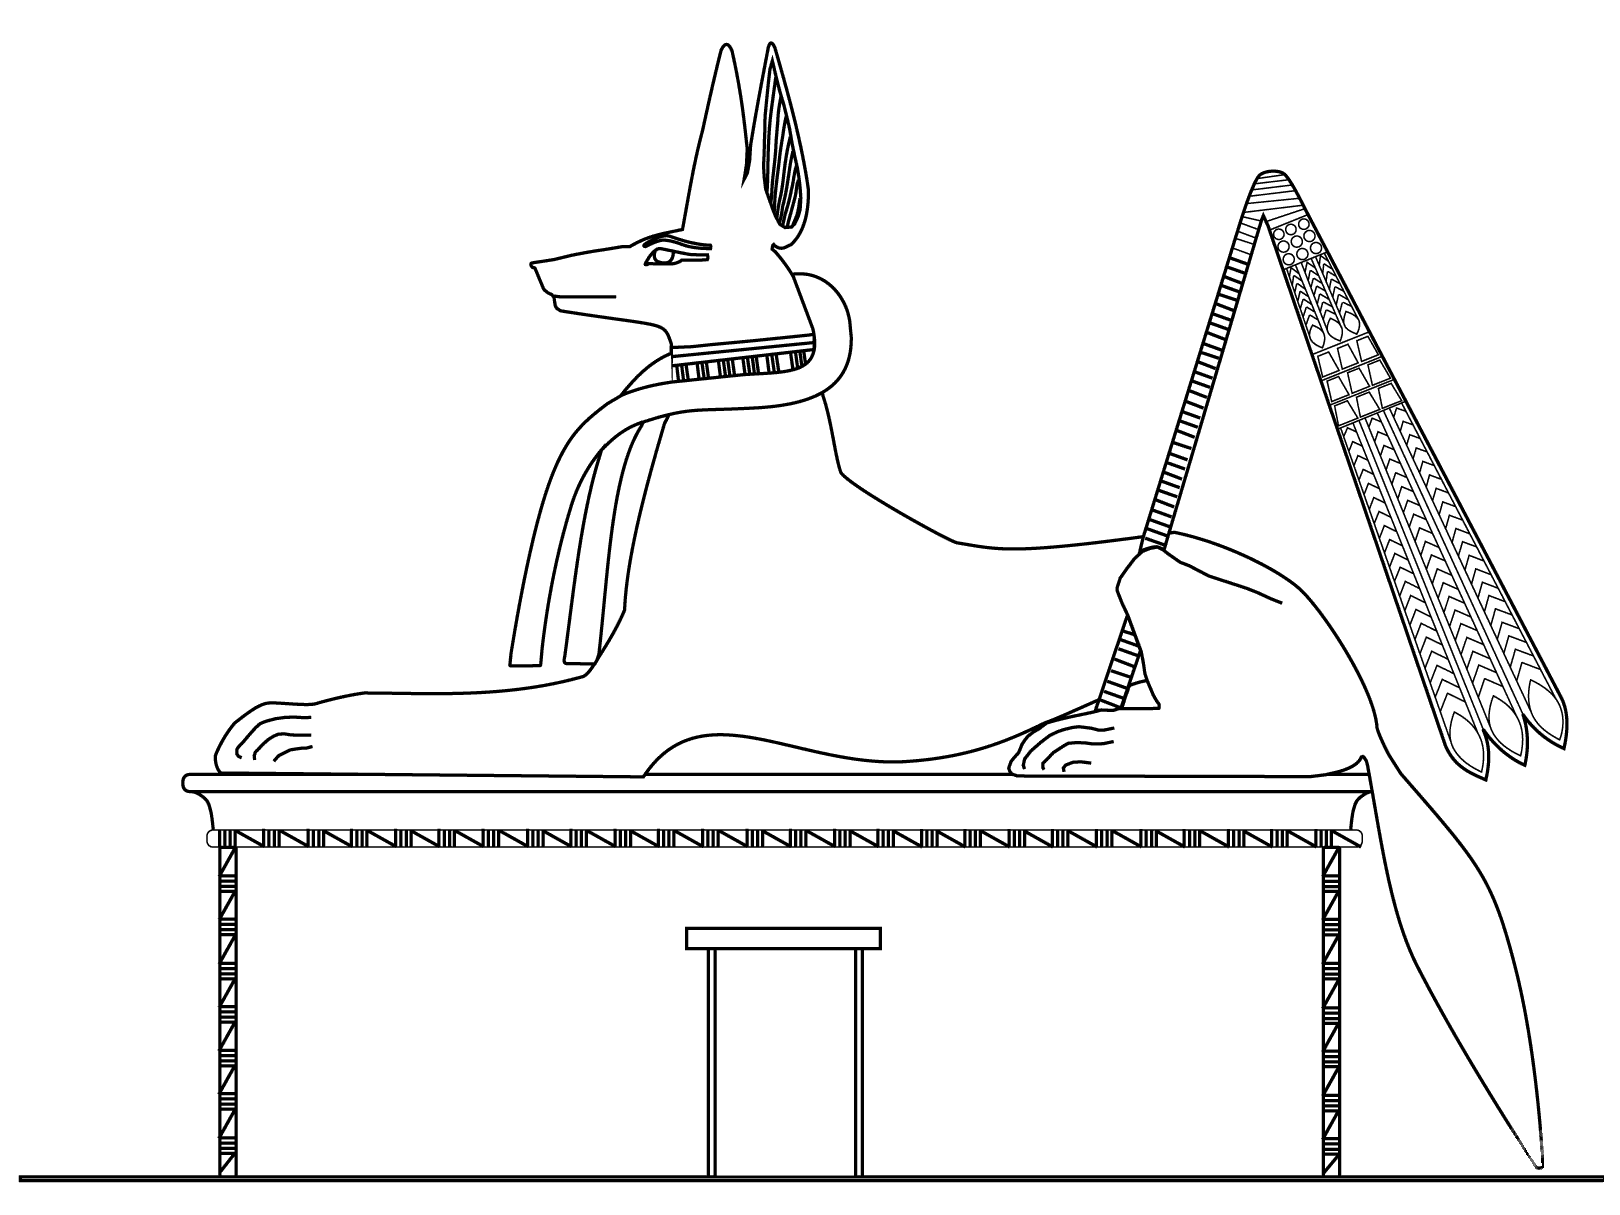 Anubis, in the form of a Jackal